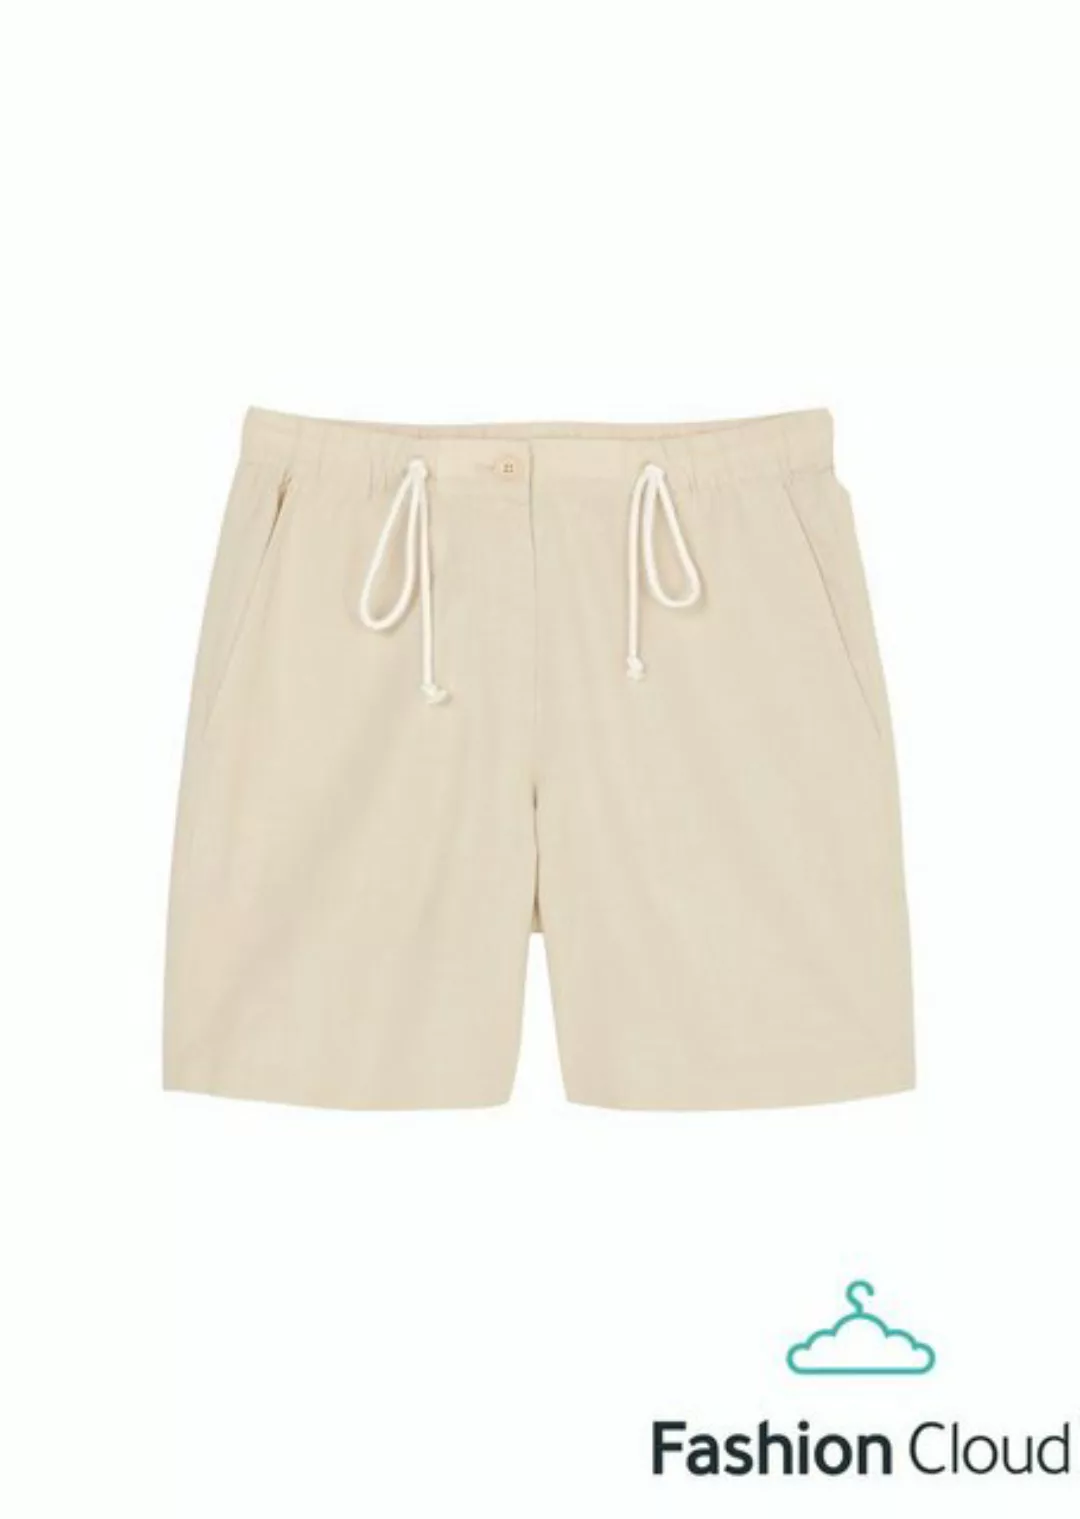 Marc O'Polo Stoffhose Shorts, relaxed jogging style, mid günstig online kaufen